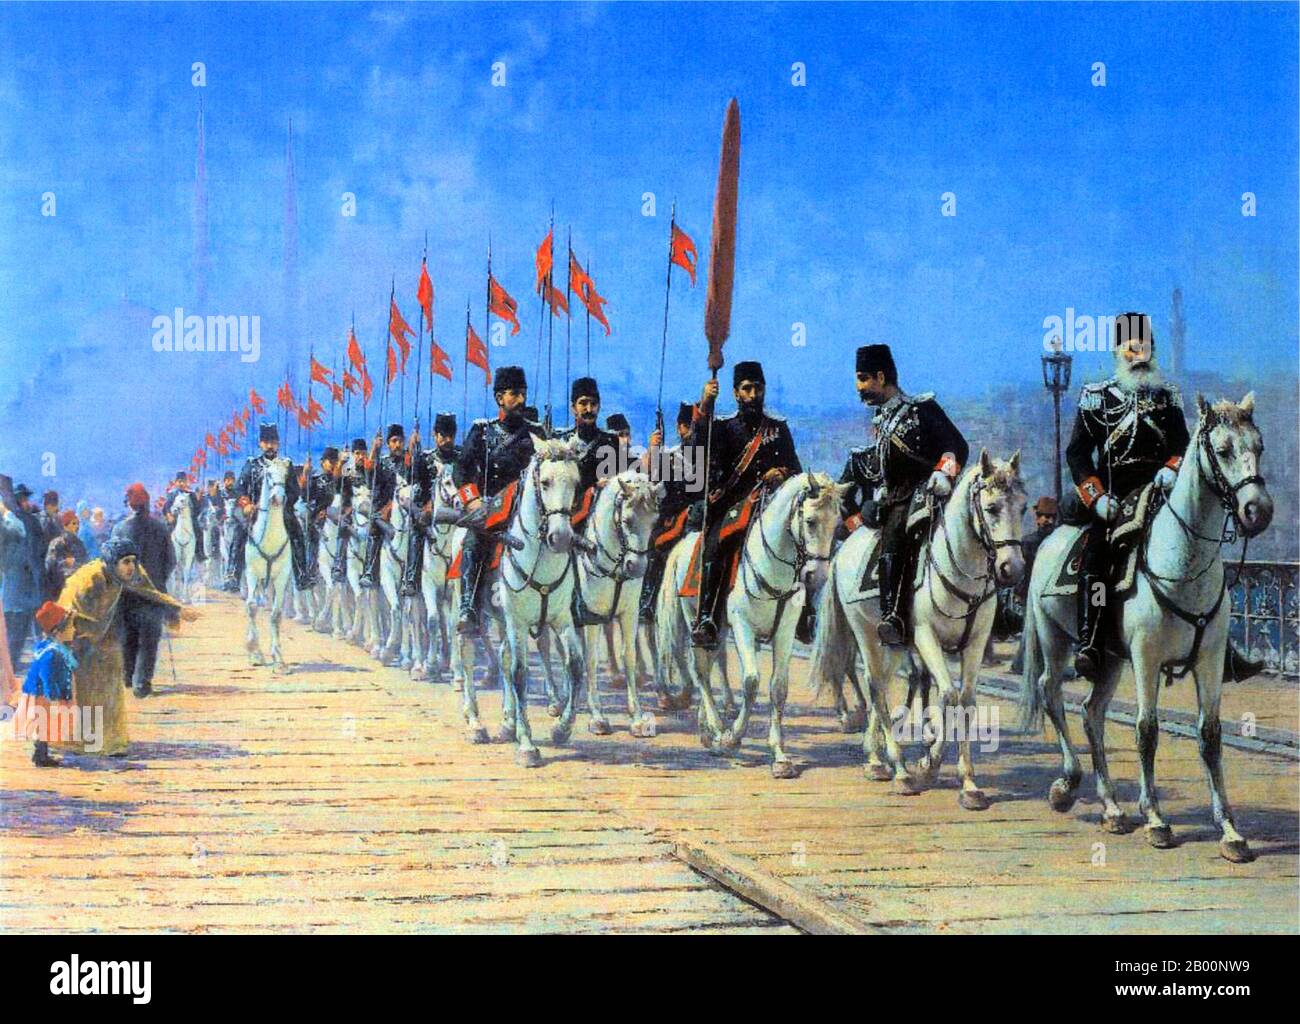 Turkey/Italy: 'The Ertugrul Cavalry Regiment crossing the Galata Bridge'. Painting by Fausto Zonaro (1854-1929), 1901.  The Ottoman Empire's power and prestige peaked in the 16th and 17th centuries, particularly during the reign of Suleiman the Magnificent. The empire was often at odds with the Holy Roman Empire in its steady advance towards Central Europe through the Balkans and the southern part of the Polish-Lithuanian Commonwealth. At sea, the empire contended with the Holy Leagues, composed of Habsburg Spain, the Republic of Venice and the Knights of St. John, to control the Mediterranean Stock Photo